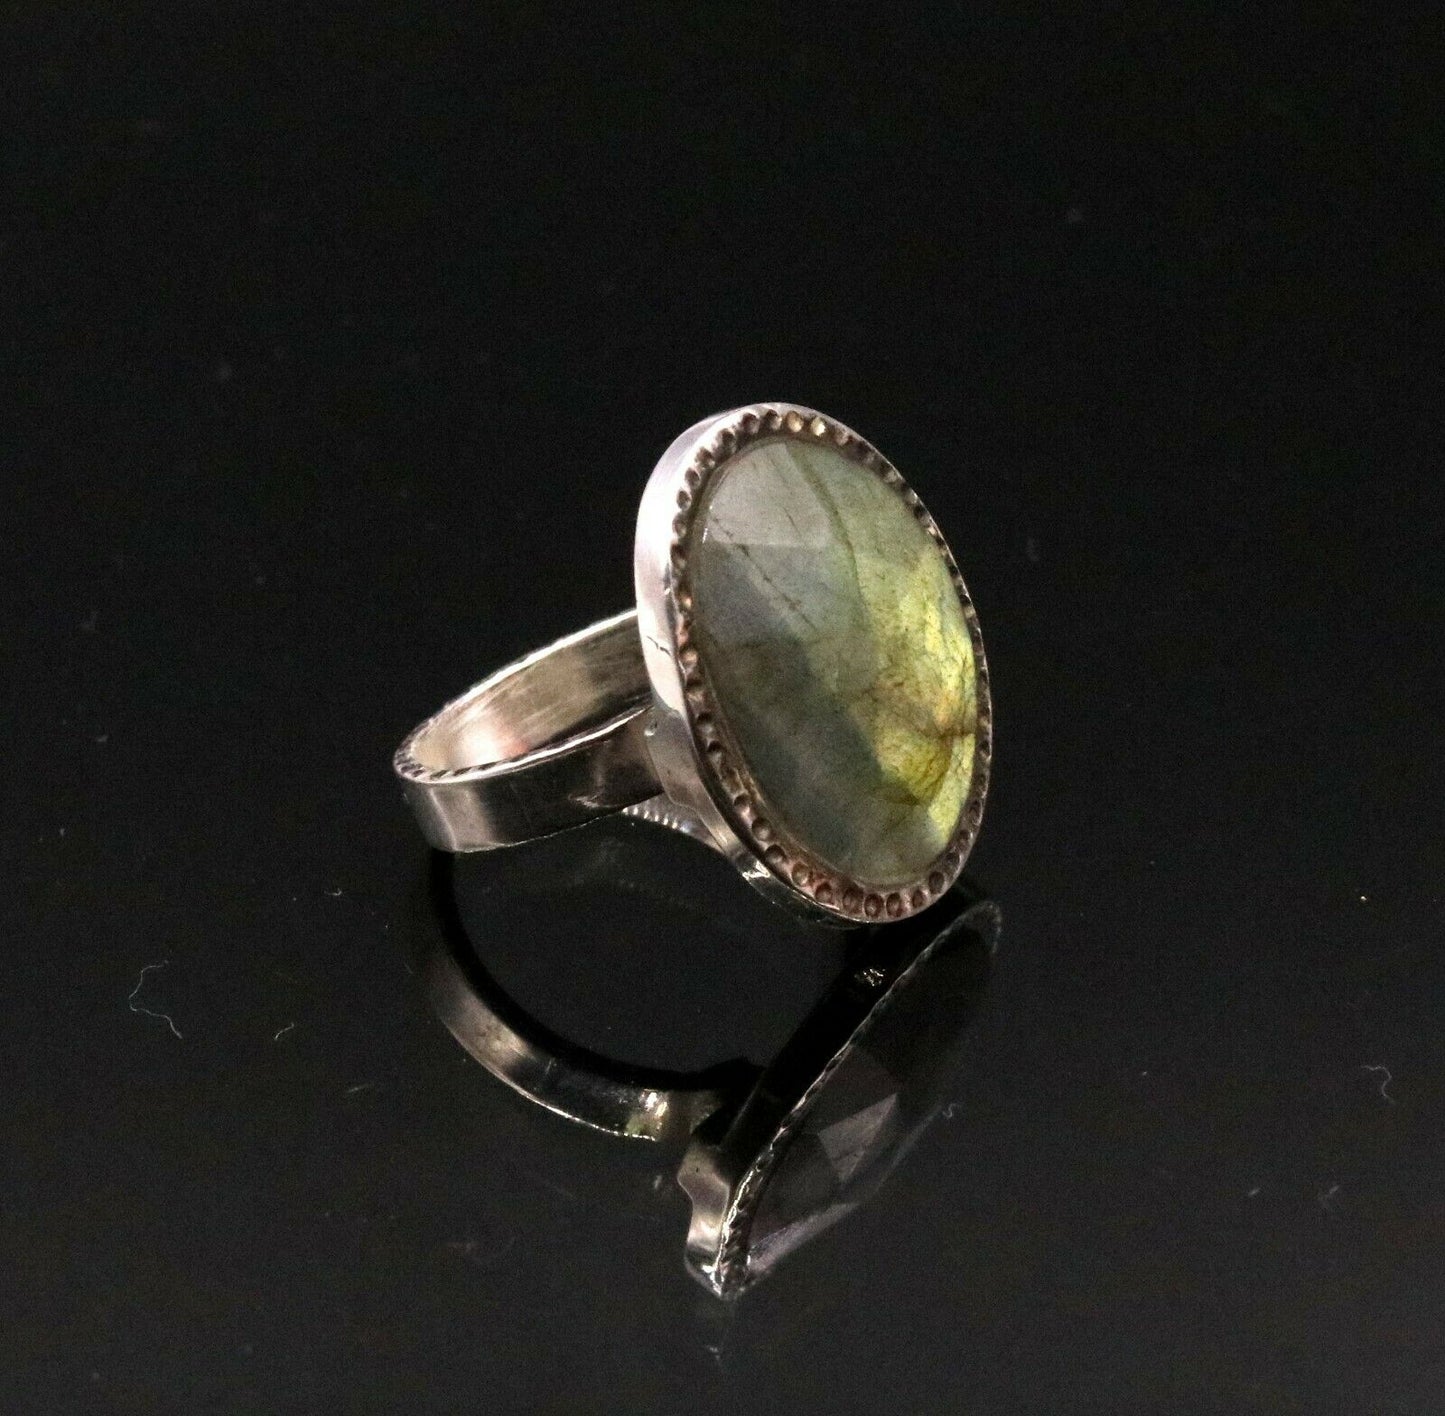 FABULOUS LABRADORITE 925 SOLID SILVER UNISEX ANTIQUE DESIGN RING BAND GIFT sr92 - TRIBAL ORNAMENTS